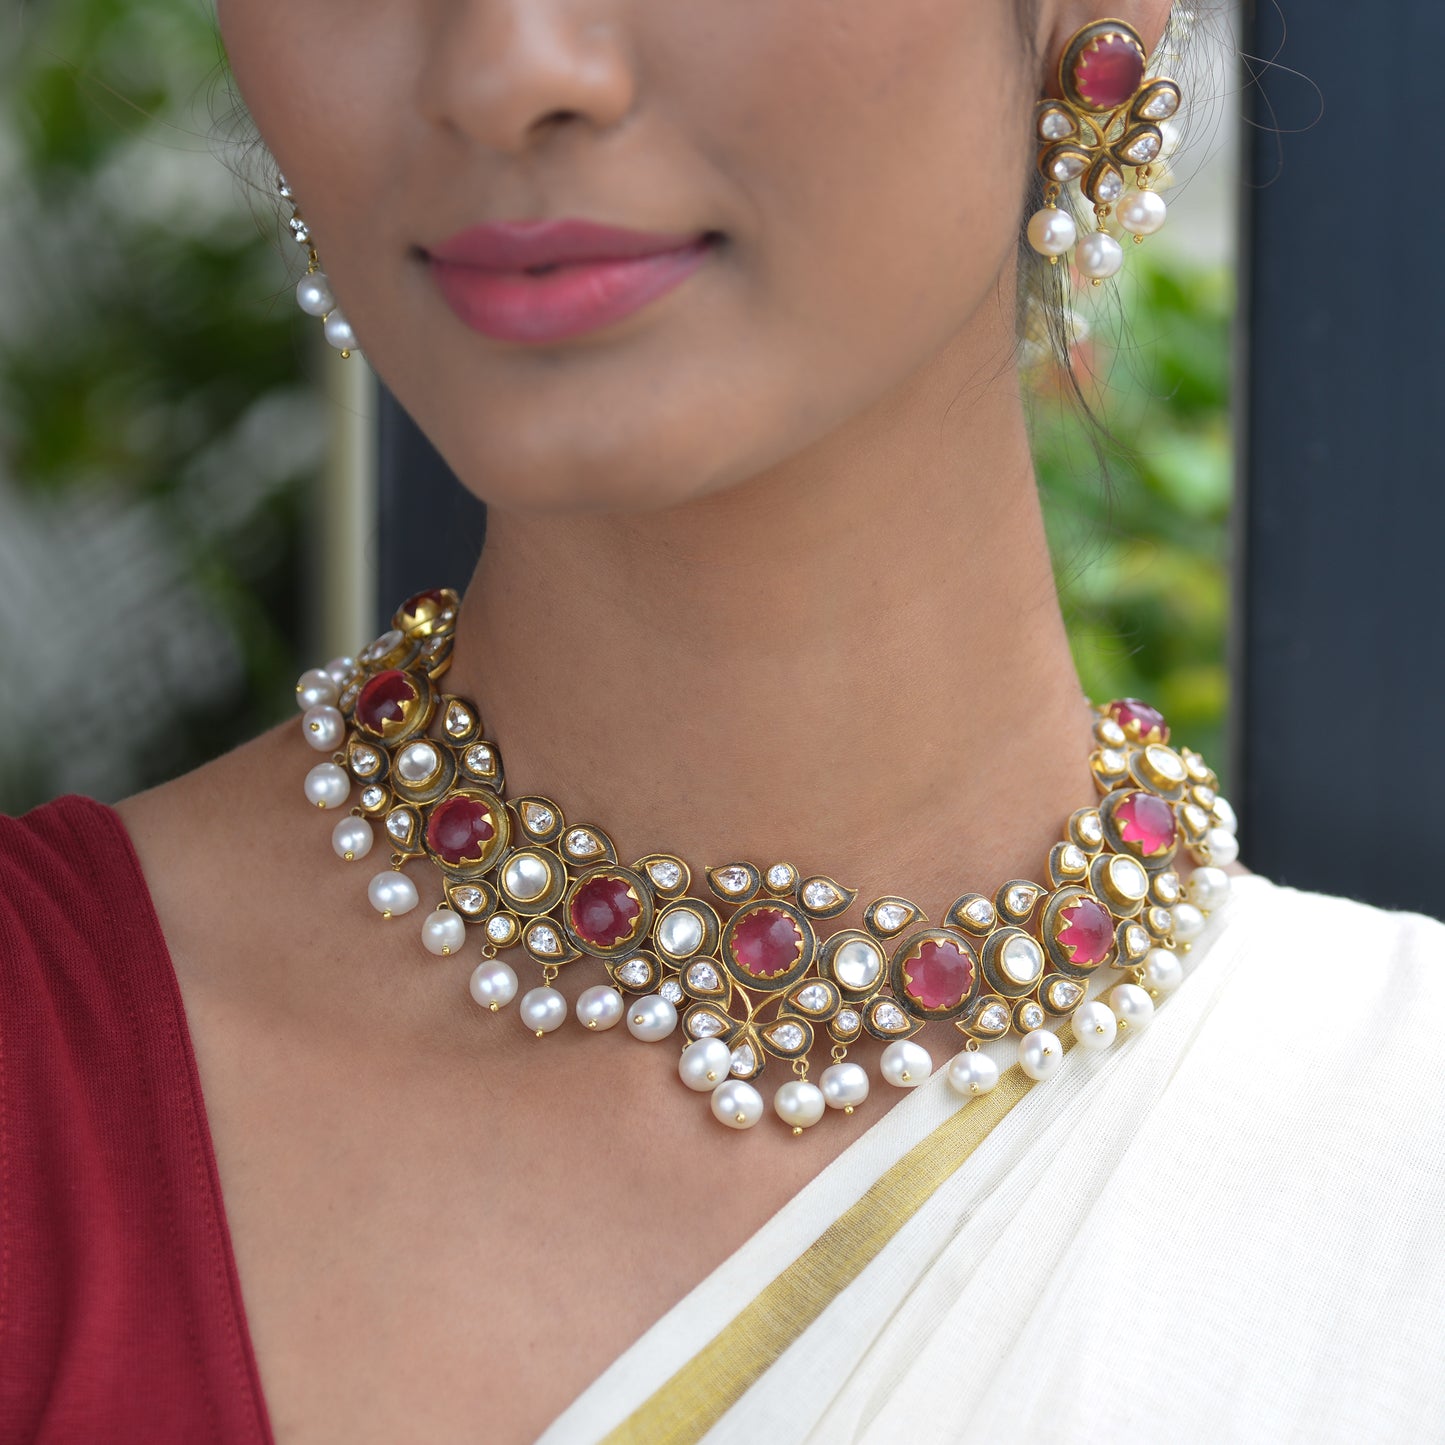 Alpa 925 Silver Polki Necklace and Earrings Set